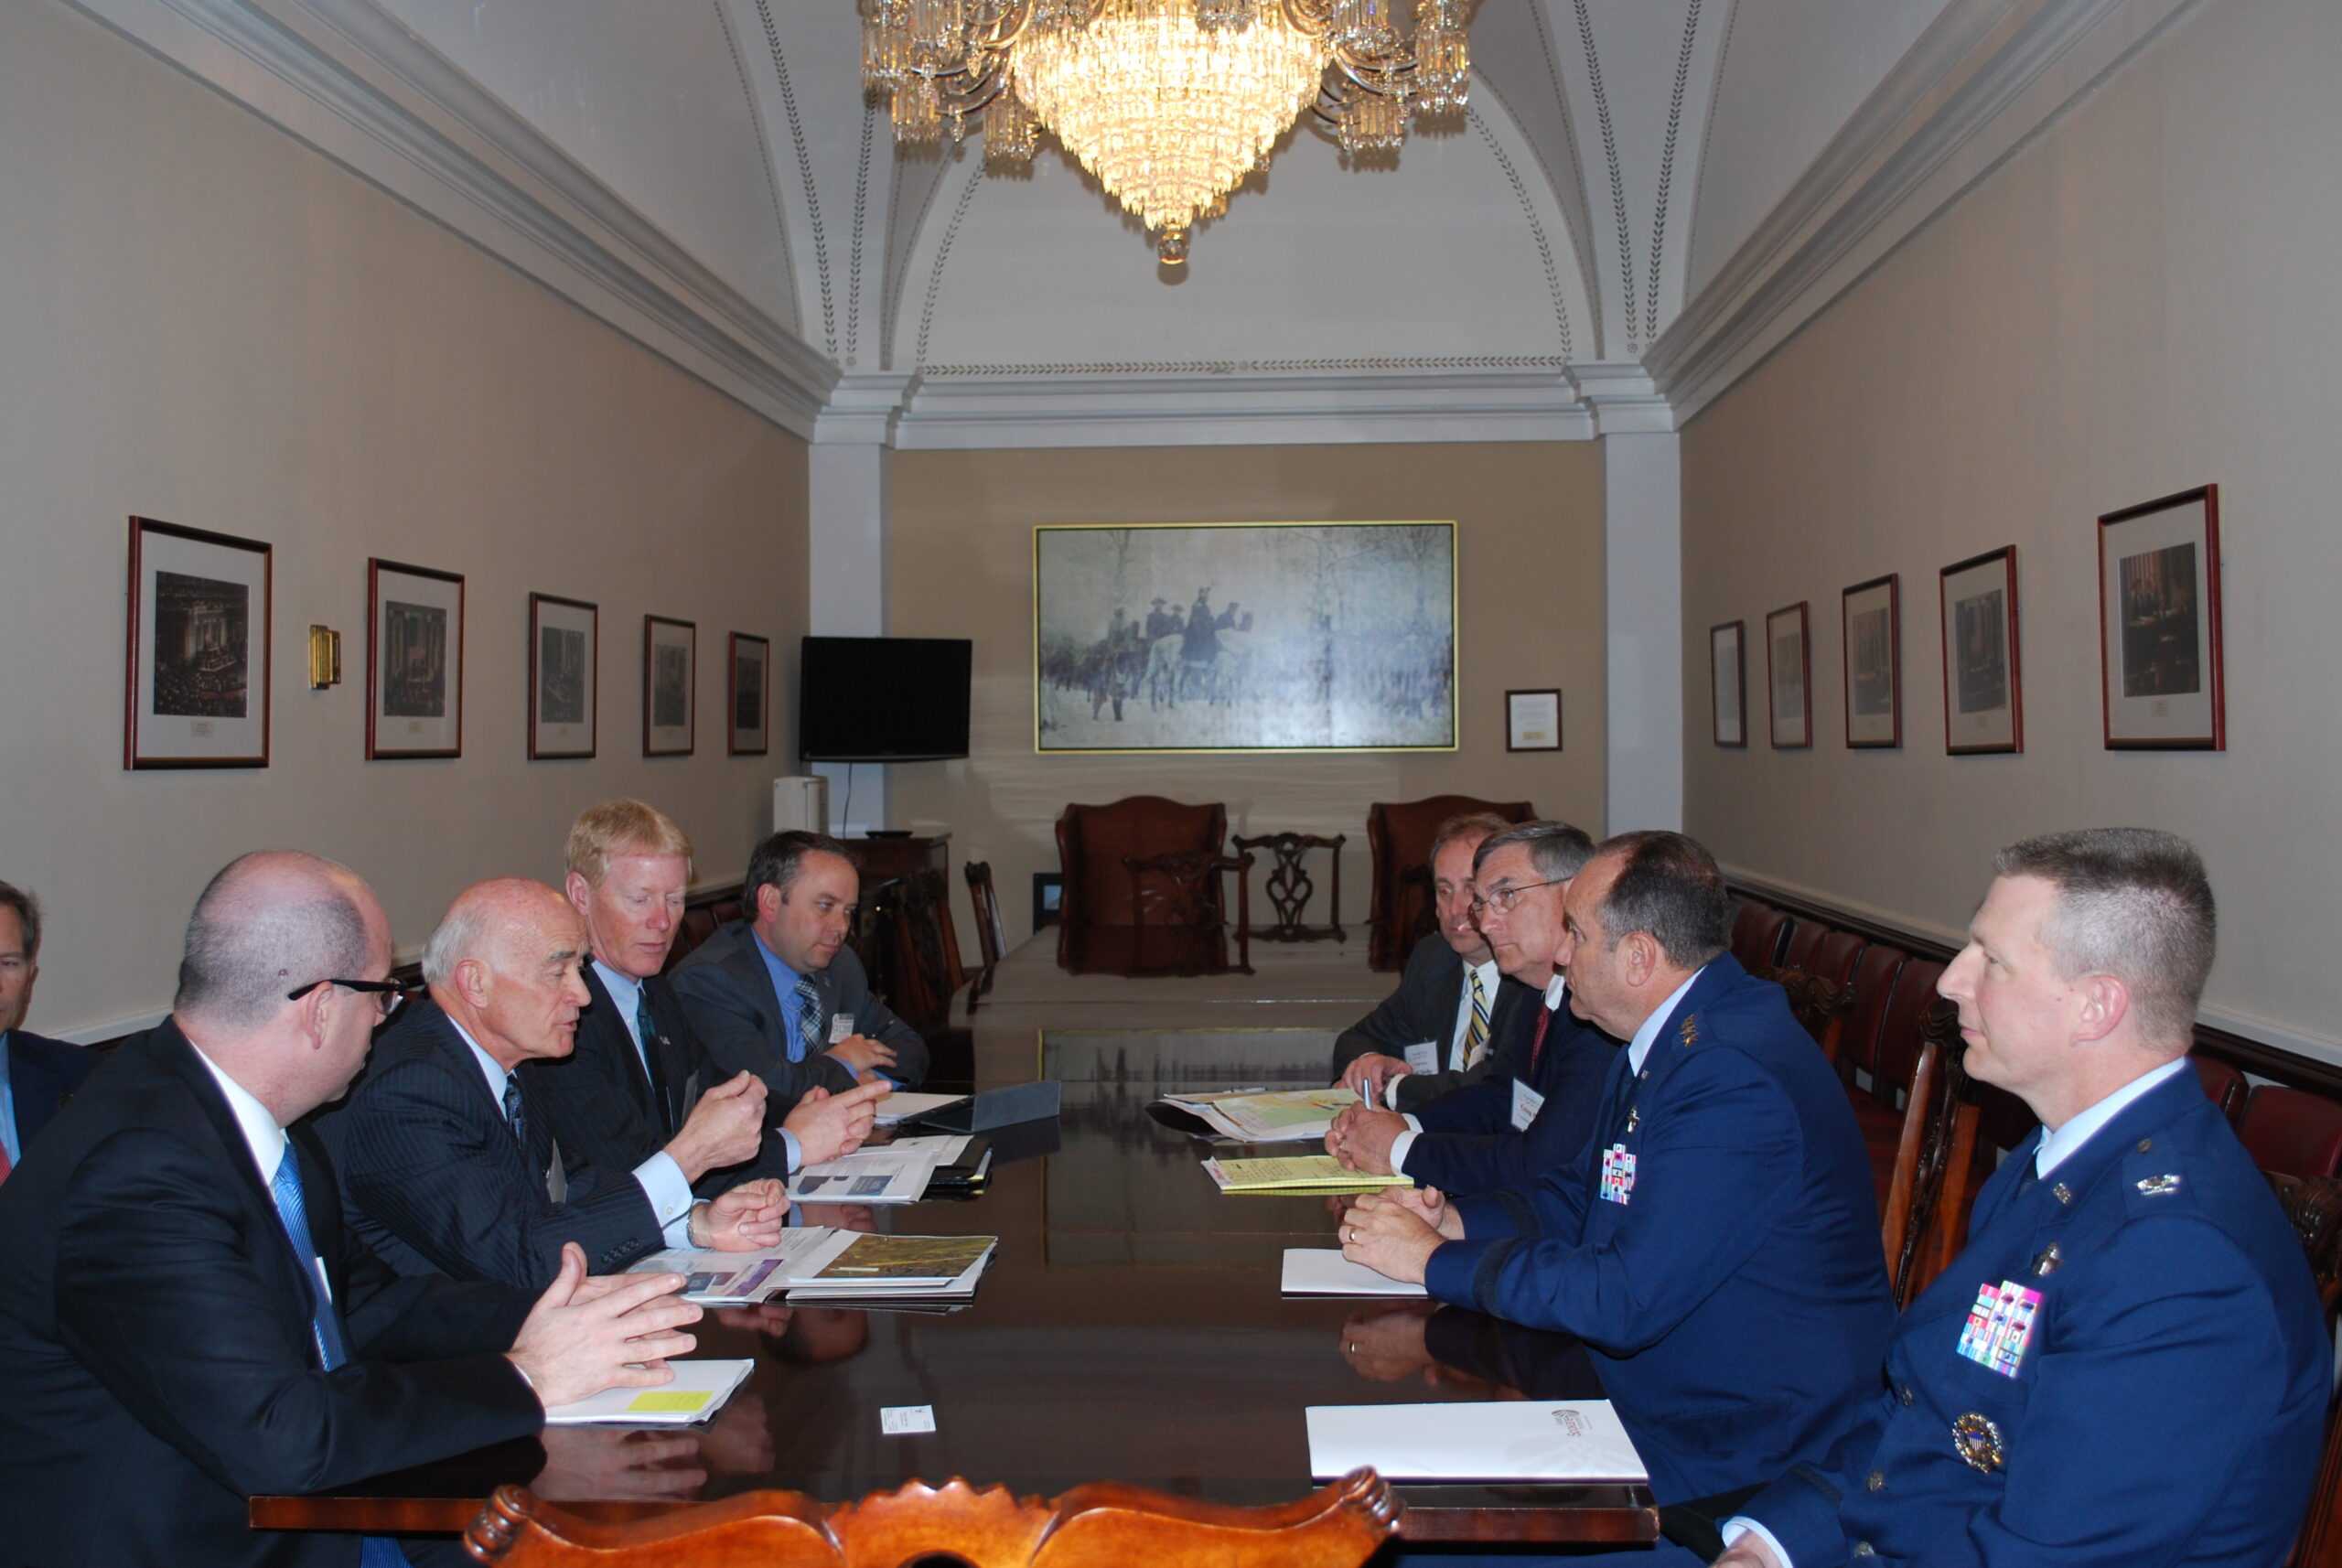 Meeting with General Breedlove